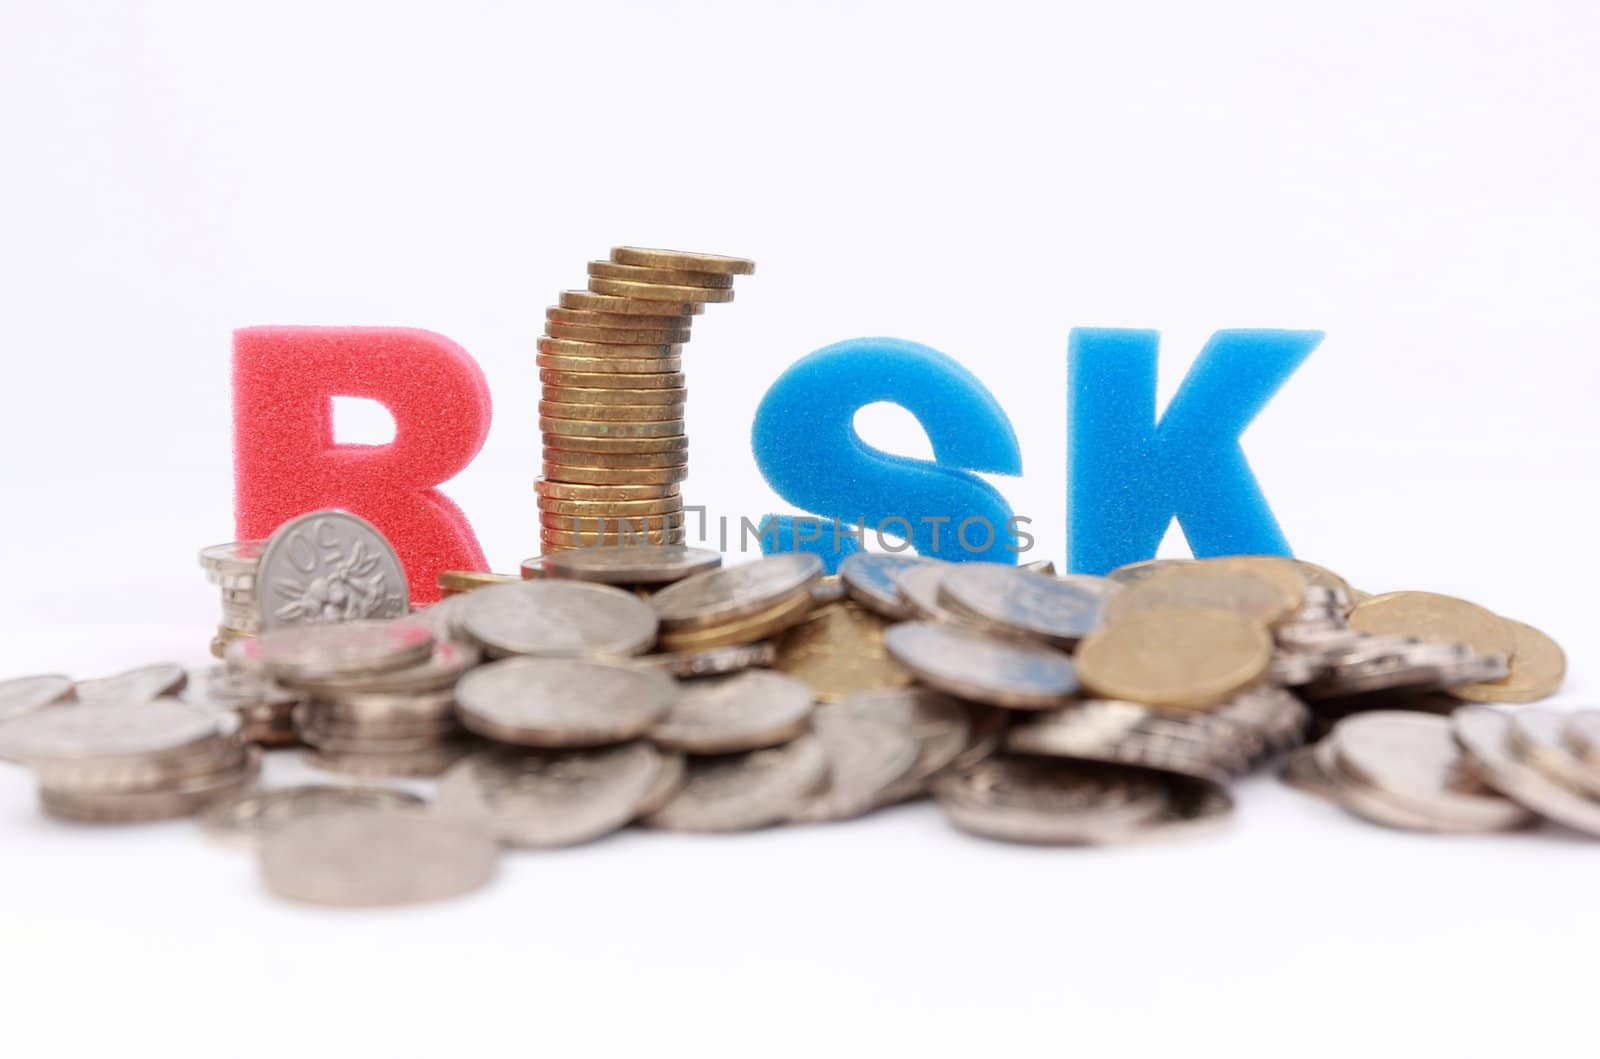 Risk word spelled out surrounded by coins